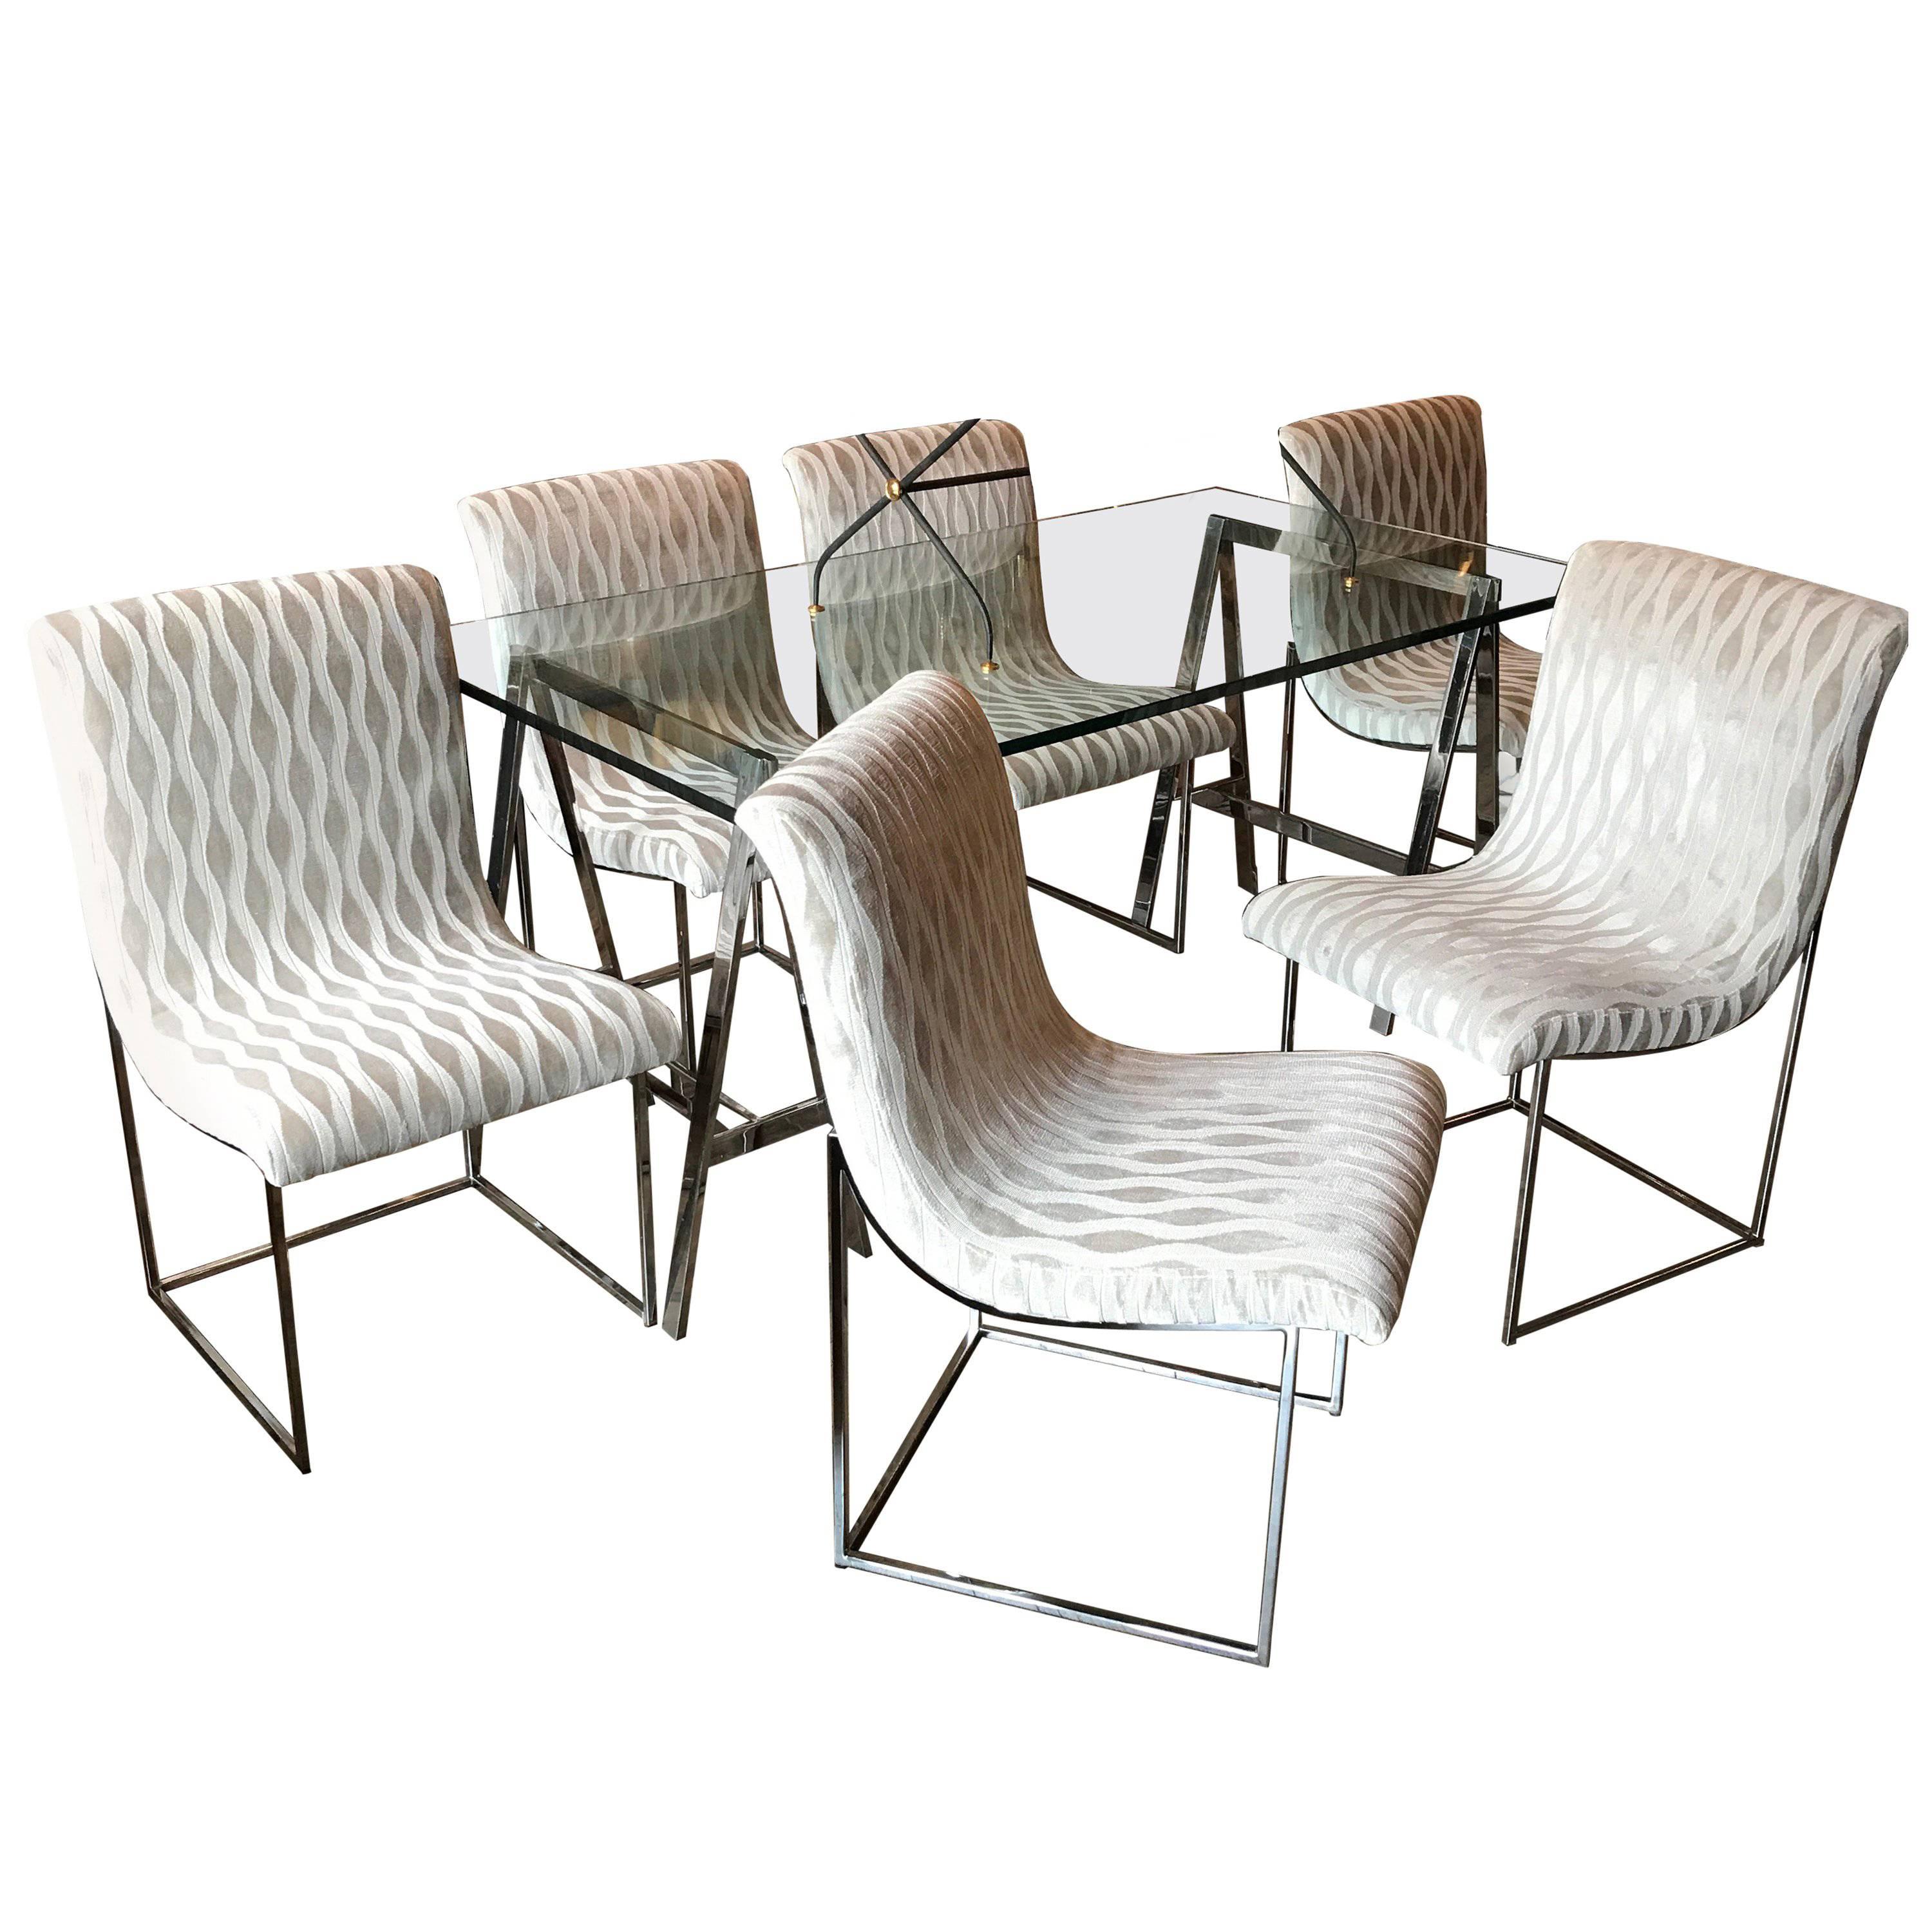 Milo Baughman for Thayer Coggin Upholstered Scoop Chrome Dining Chair Set